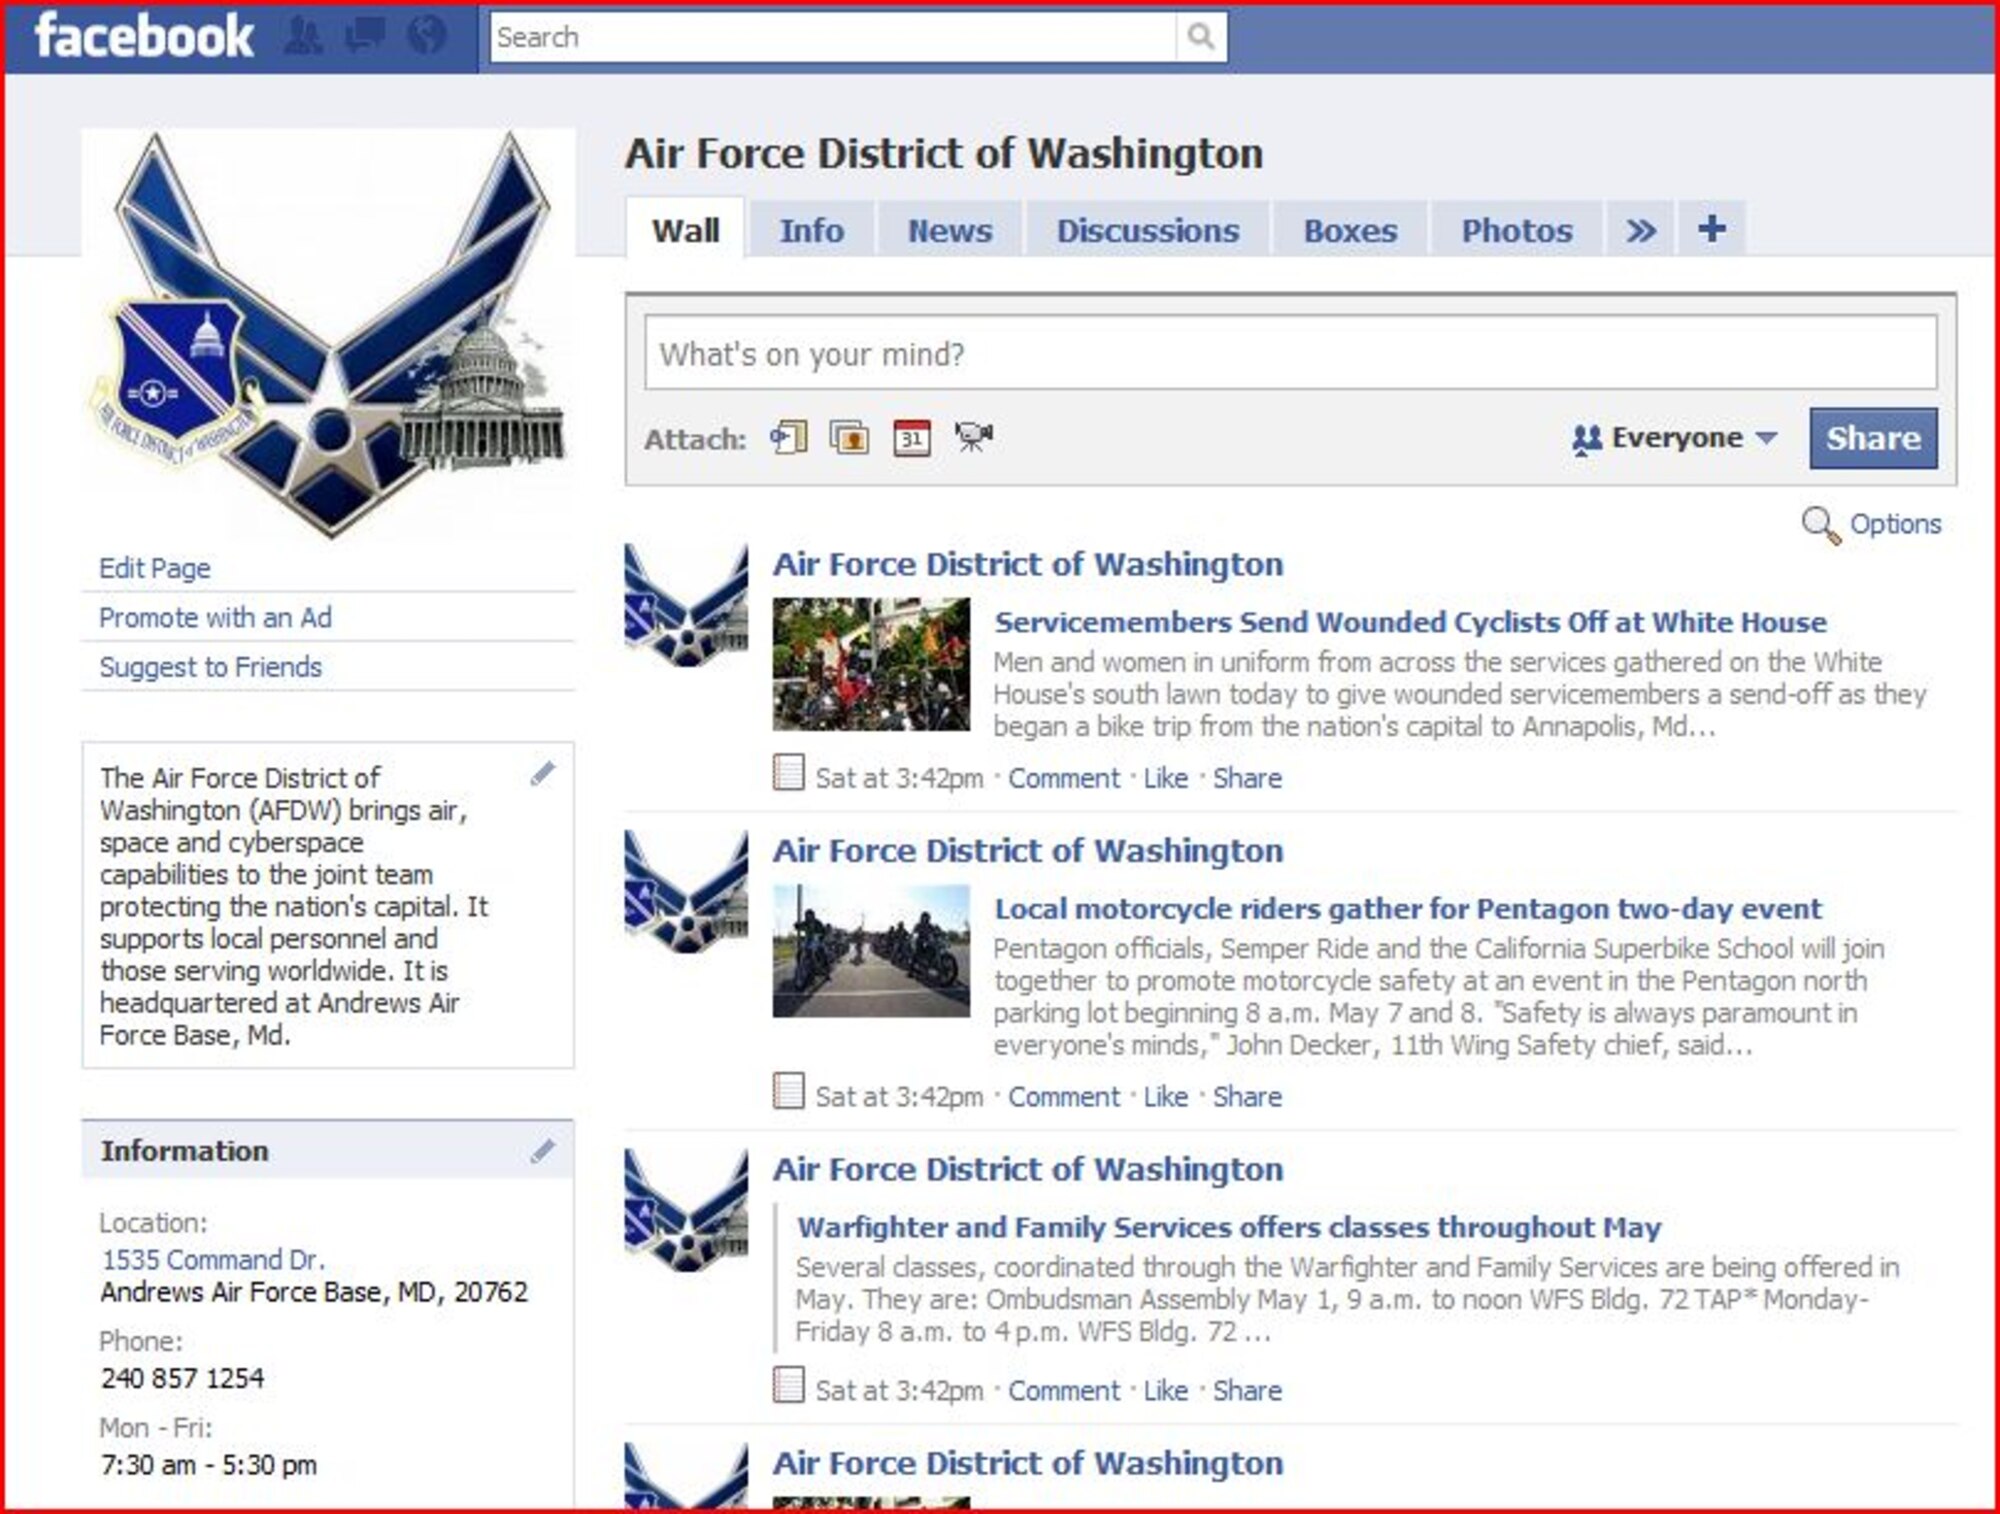 Air Force District of Washington's Facebook page is now accessible on base. Communicate with fellow Airmen and read up on the latest social networking safety precautions. All Airmen should treat information they put on social networks as public information, and take appropriate steps to safeguard themselves and the network. 